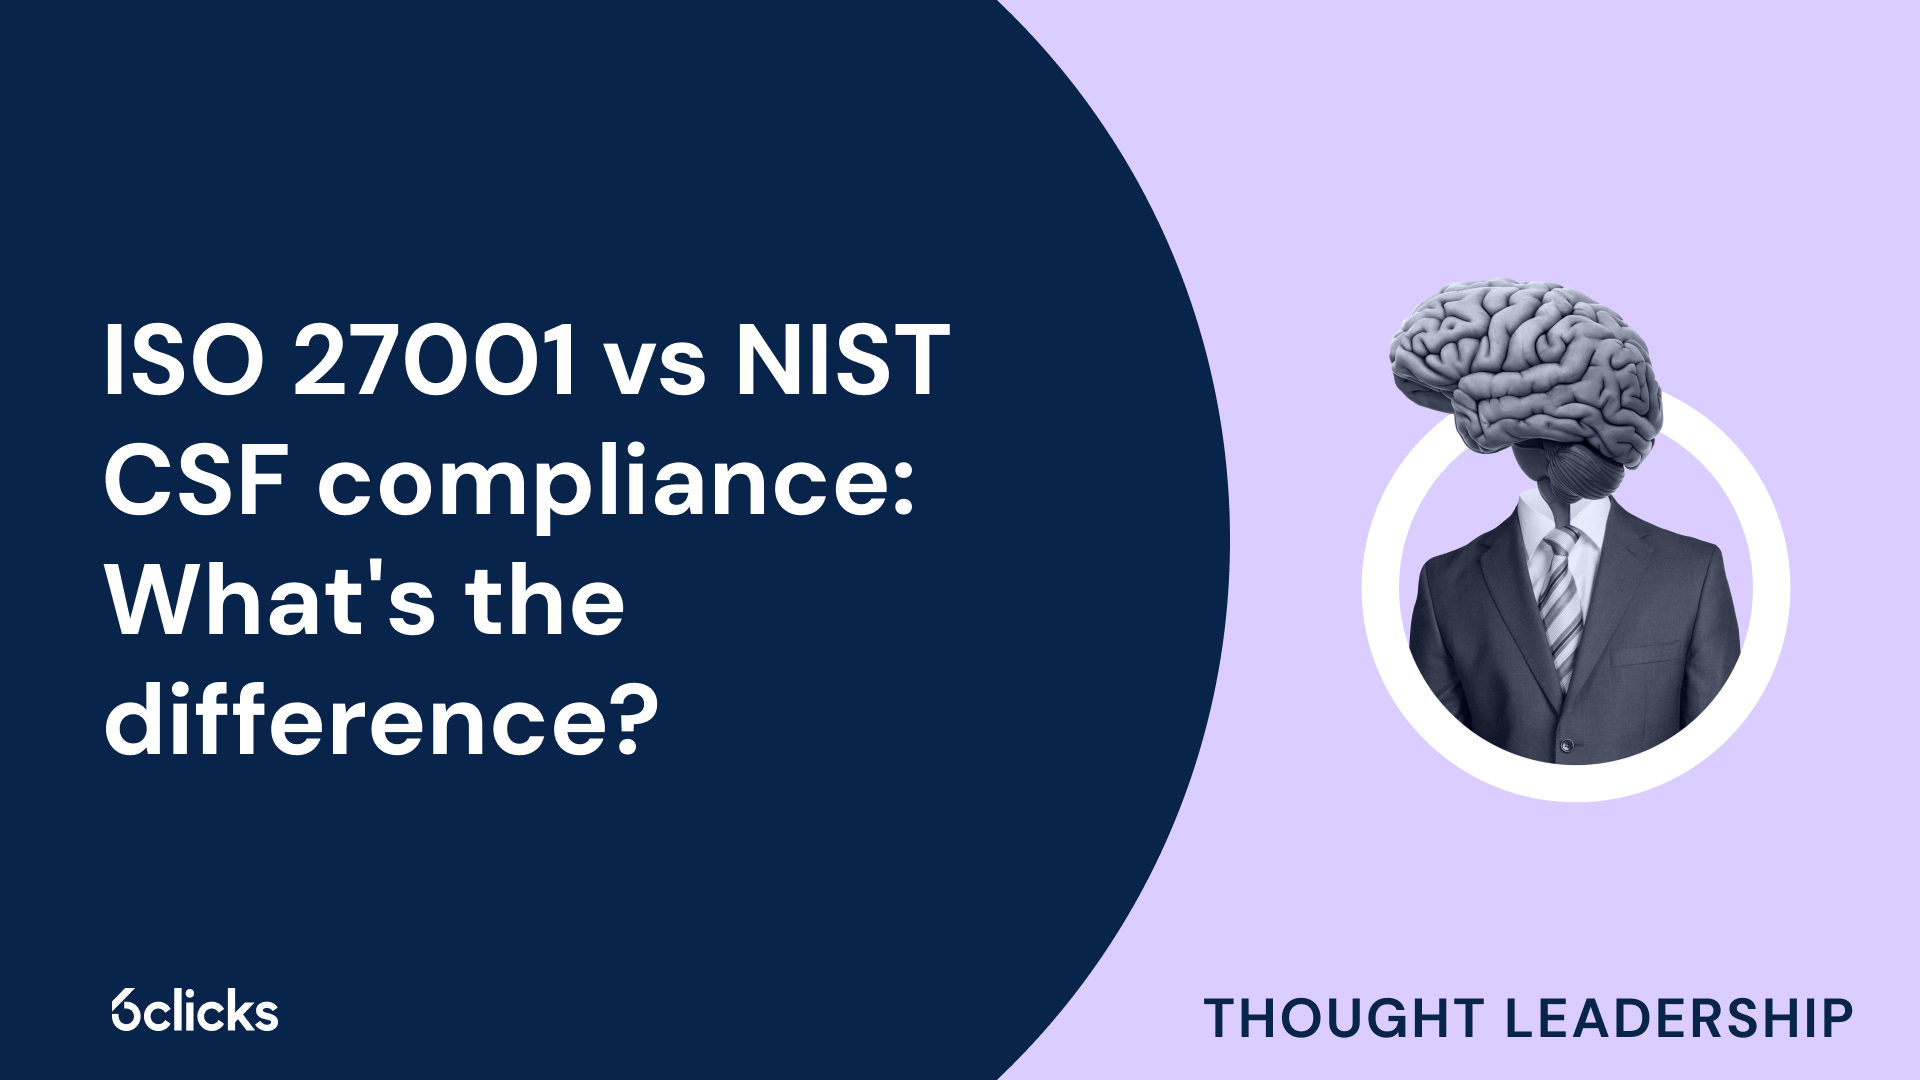 ISO 27001 vs NIST CSF compliance: What's the difference?